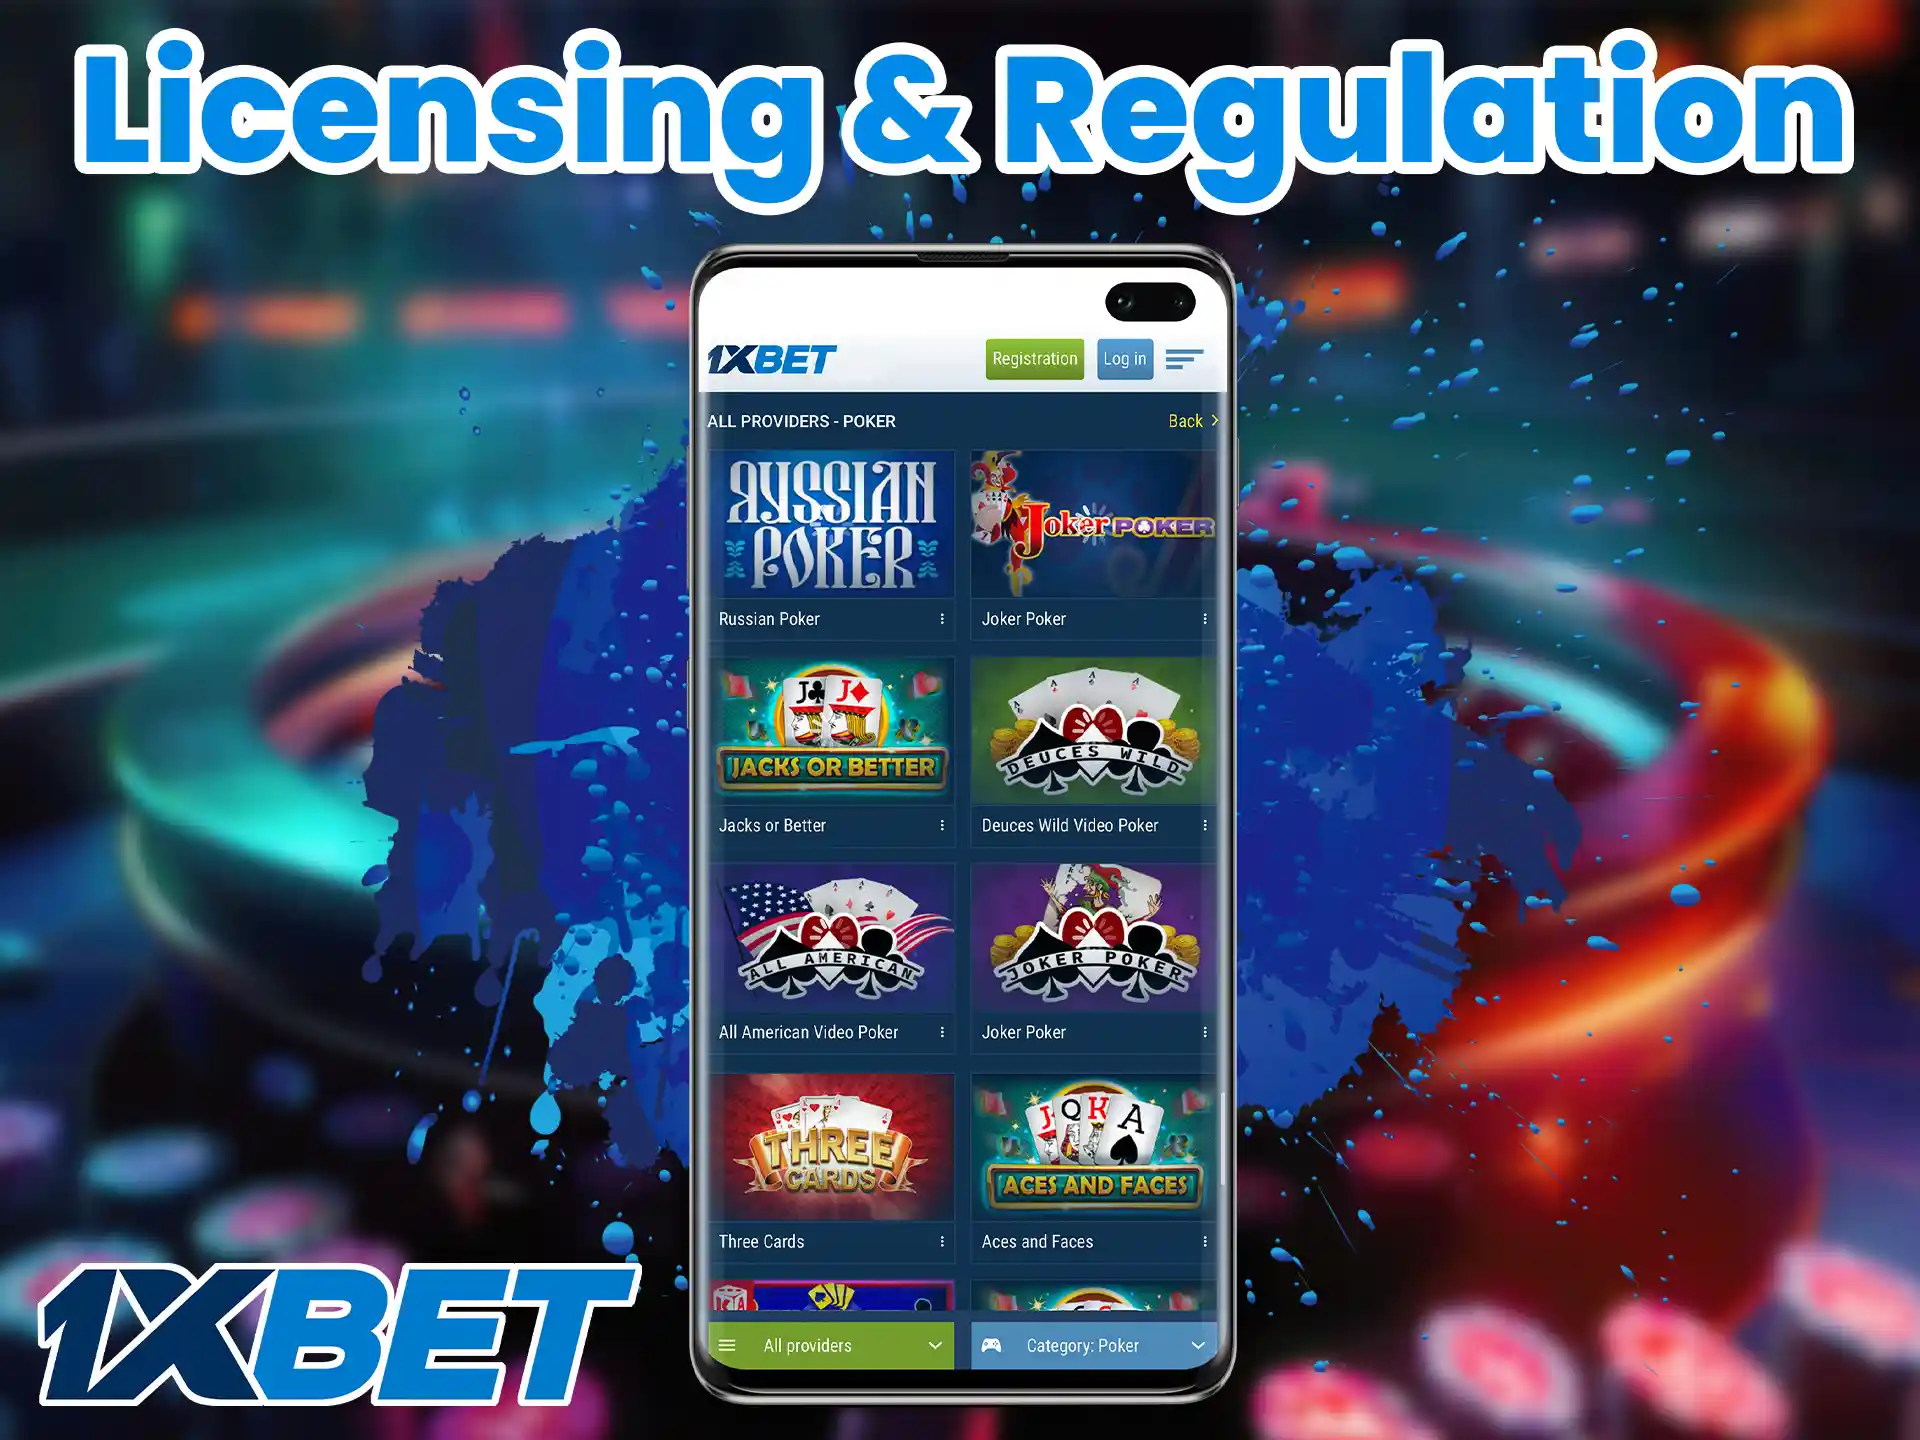 Casino 1xbet guarantees the integrity of the company and builds trust with customers.